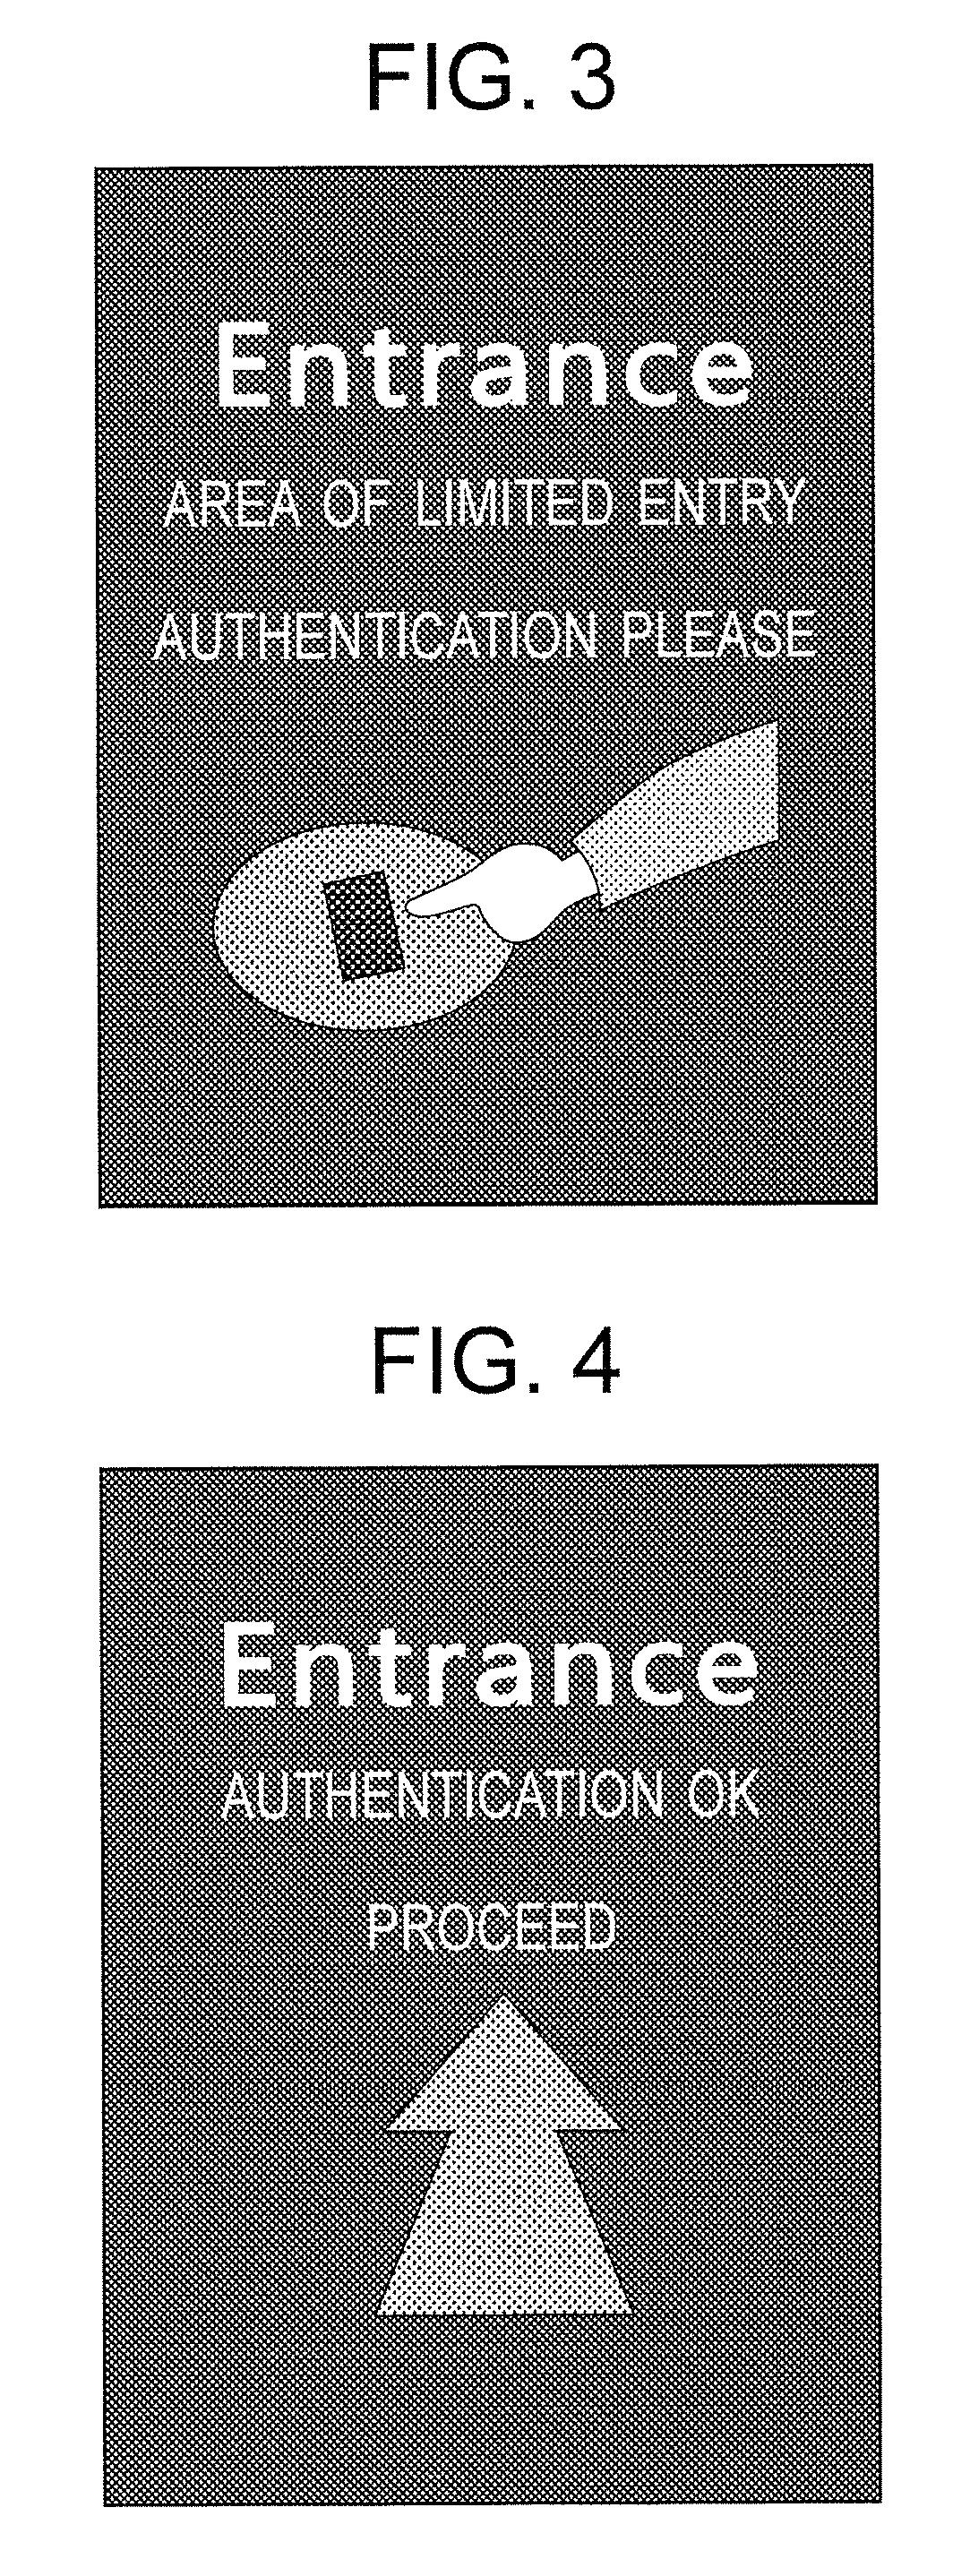 Floating image display device